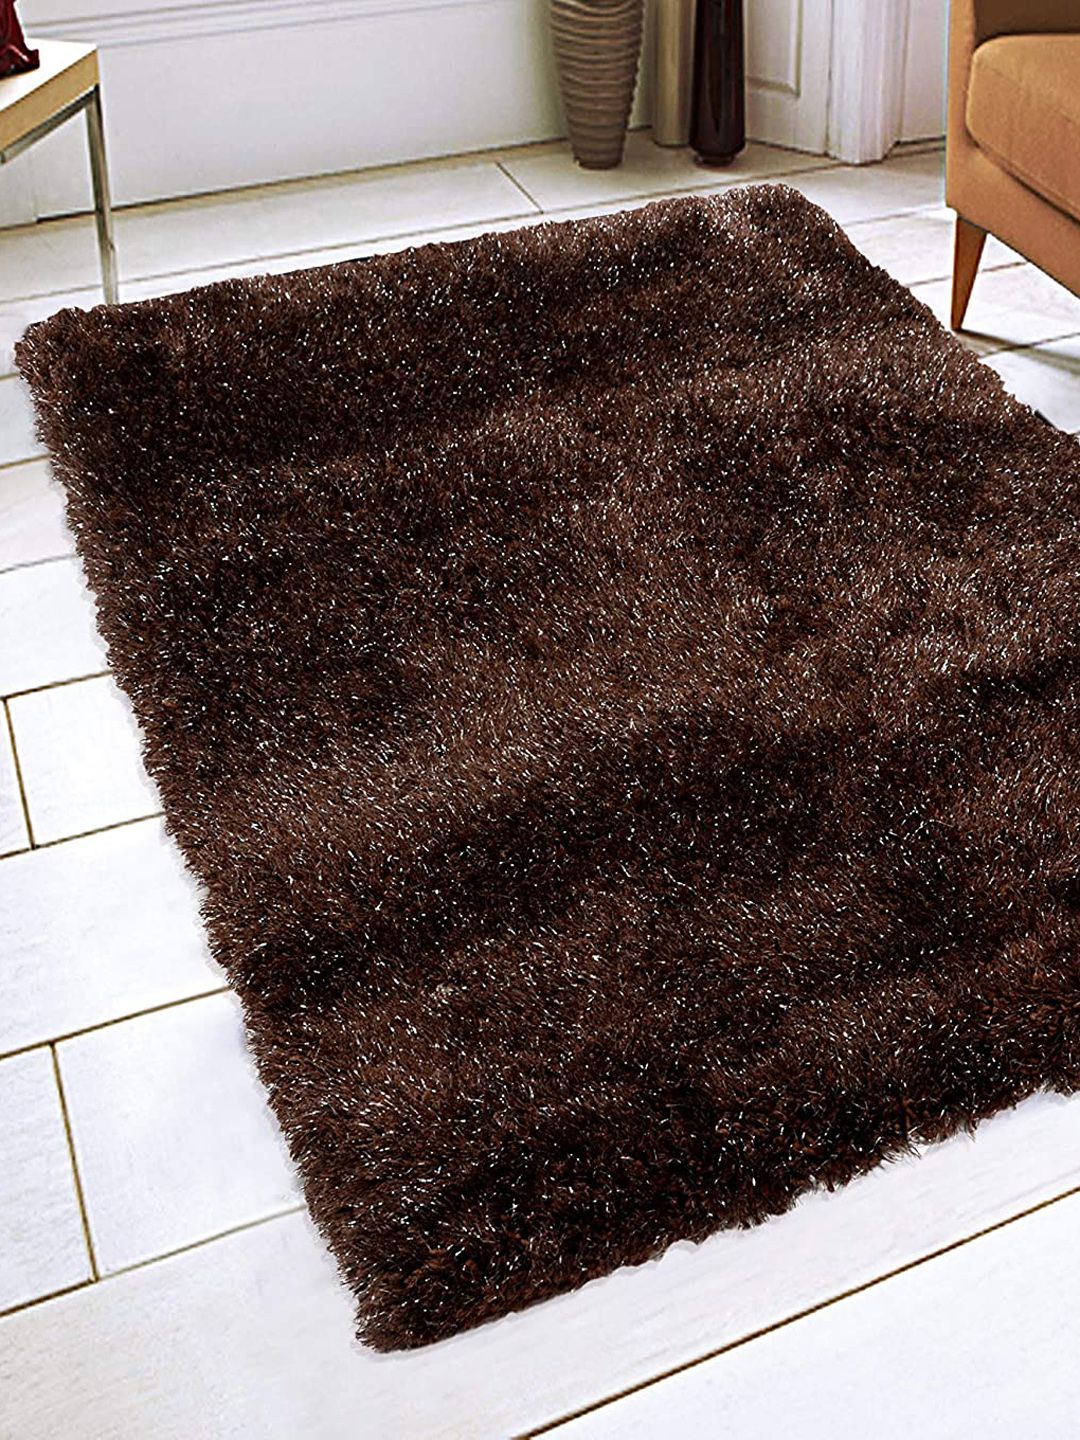 Saral Home Brown Solid Modern Carpet Price in India